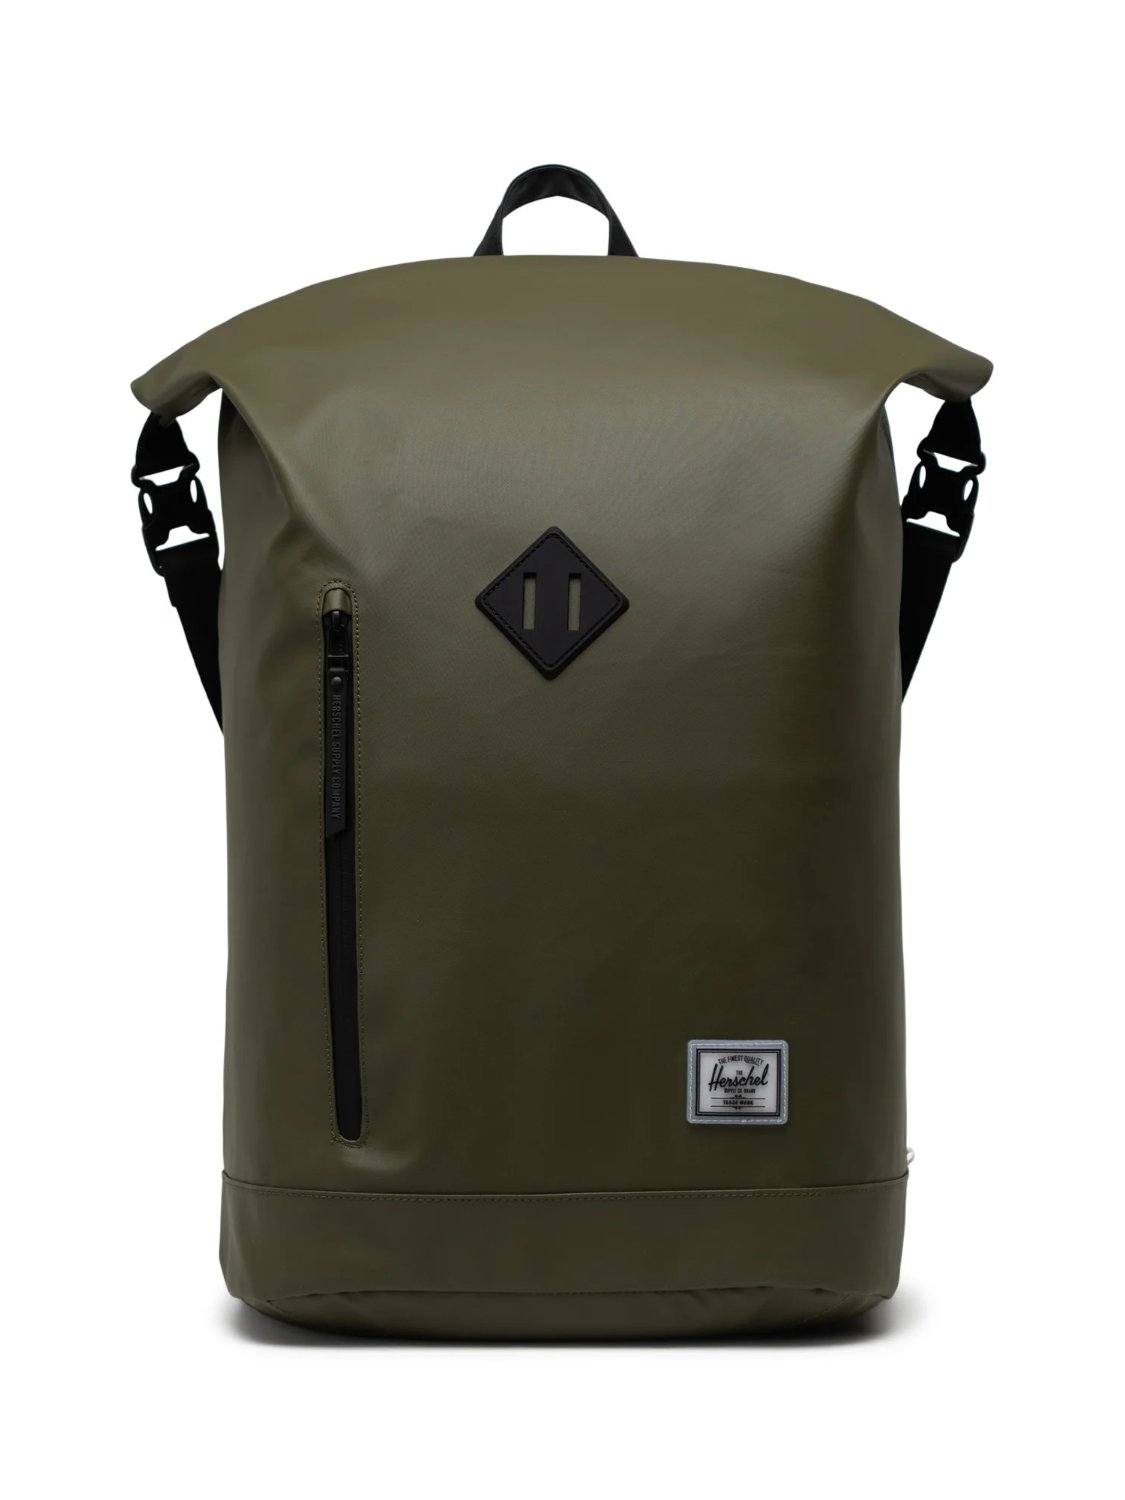 HSC ROLL TOP BACKPACK IVY GREEN 